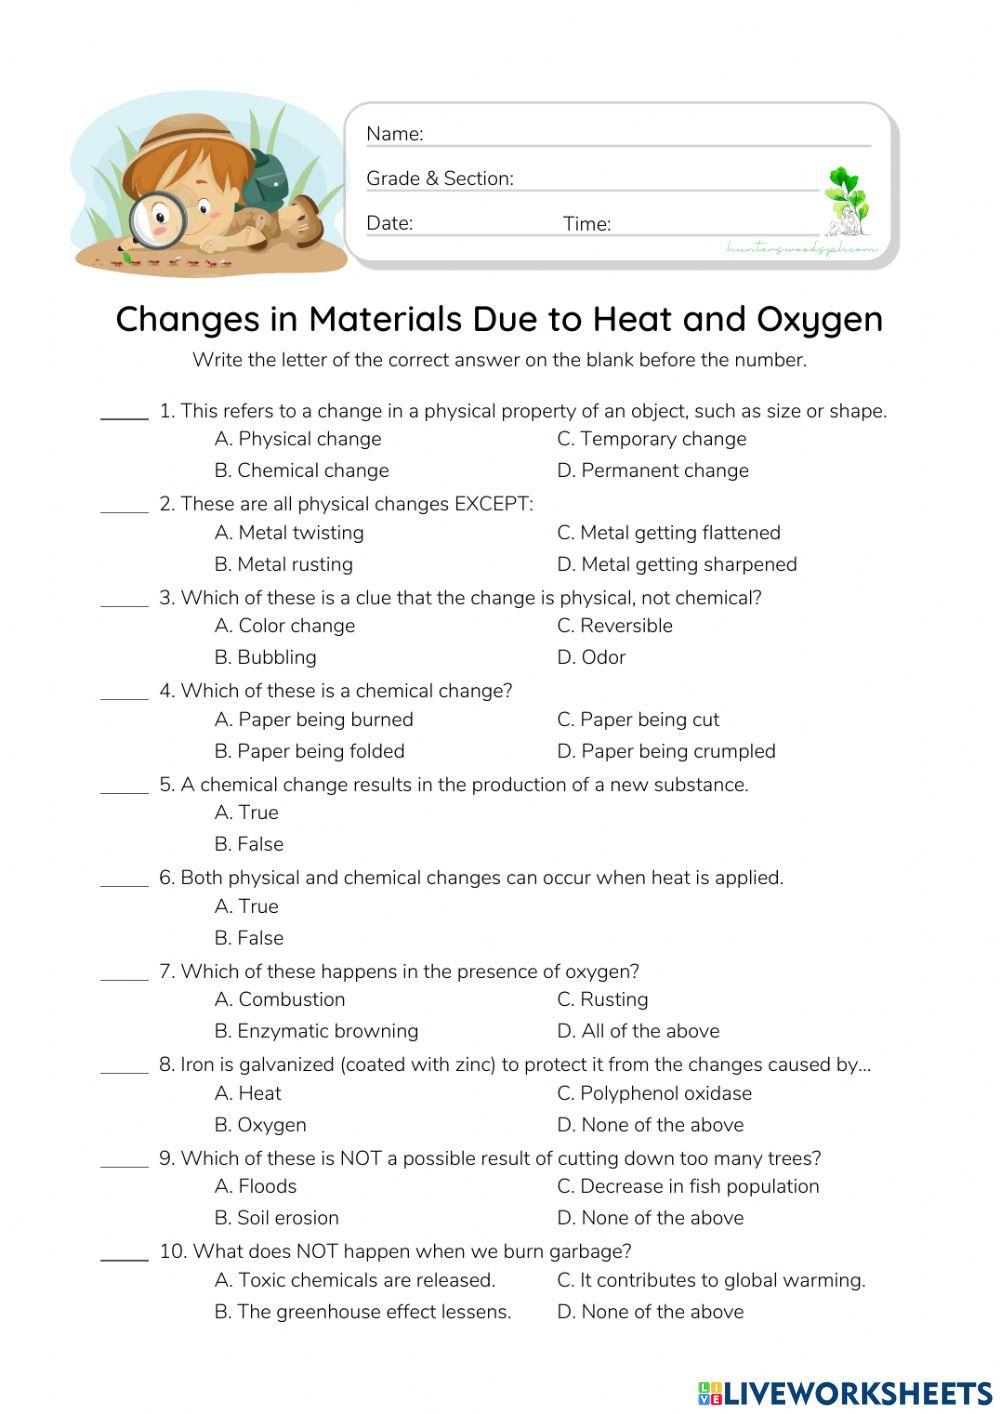 Changes in Materials Due to Heat and Oxygen - HunterWoodsPH.com Worksheet